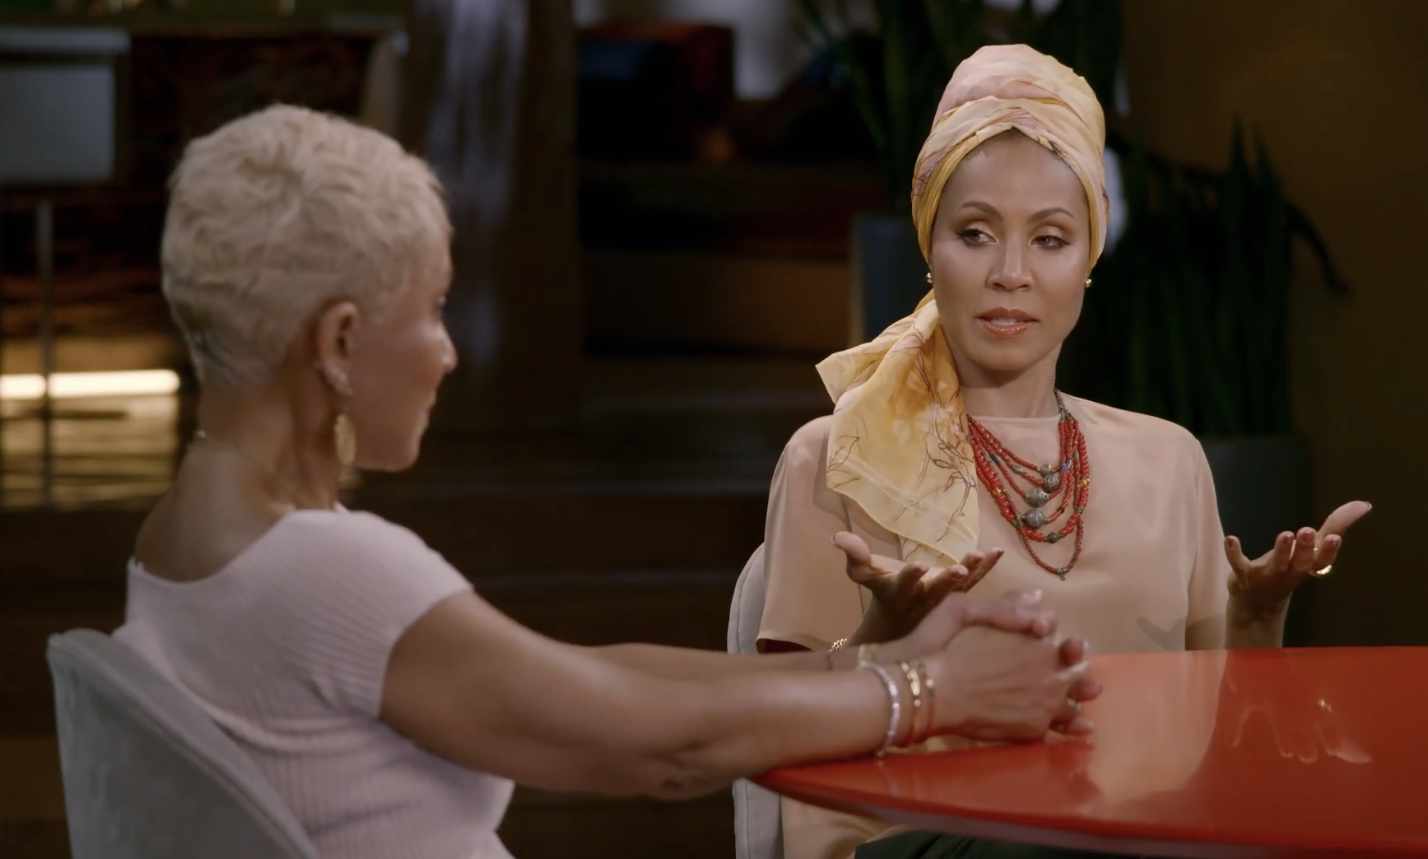 Jada speaking to her mother on an episode of Red Table Talk. Jada is wearing a beautiful head wrap